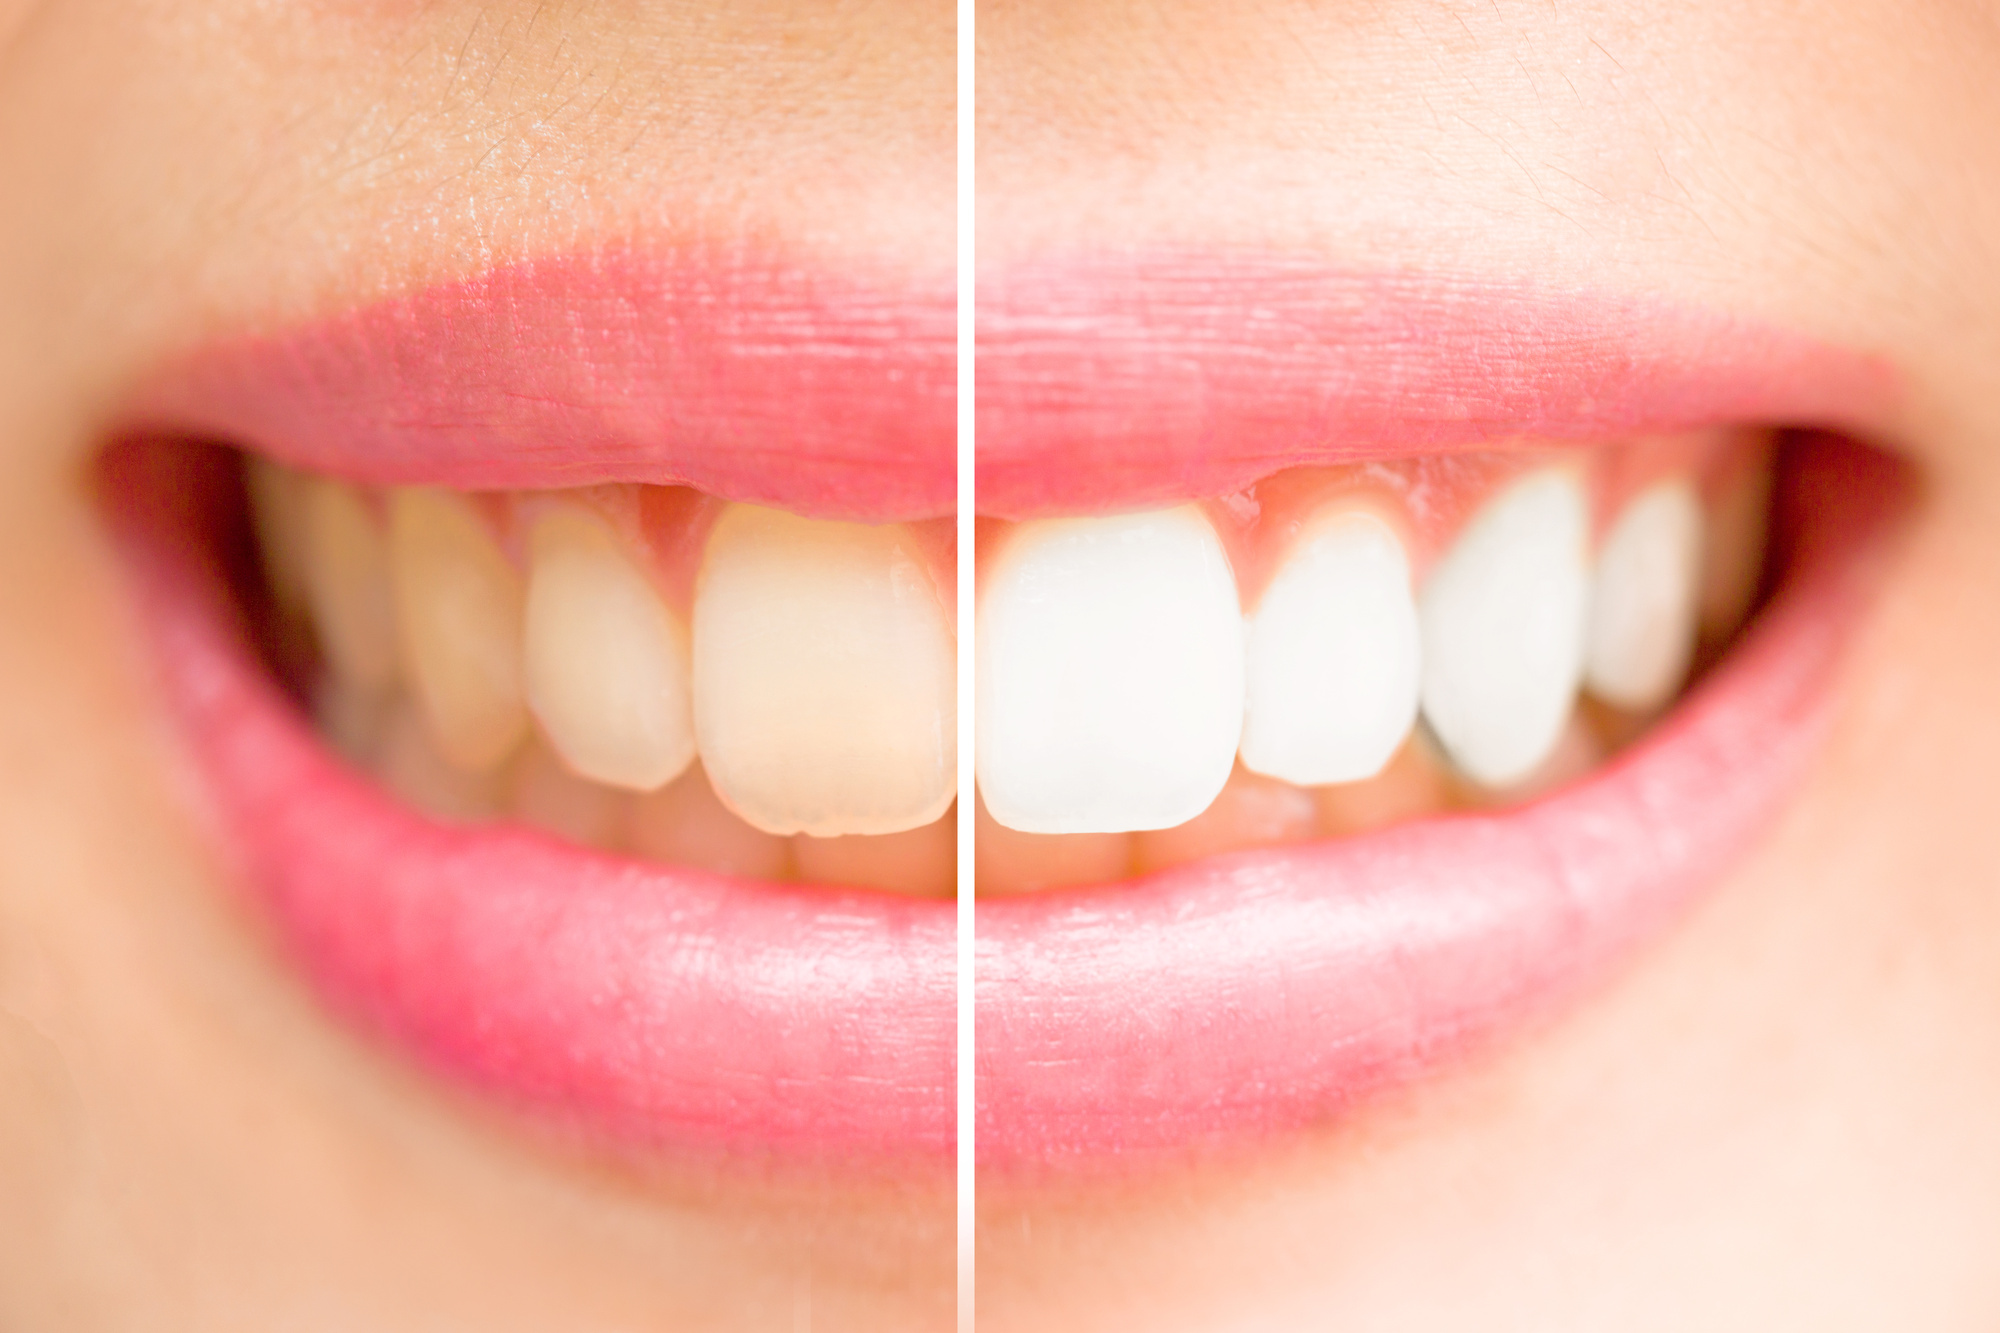 How Much Does It Cost to Get Your Teeth Whitened?